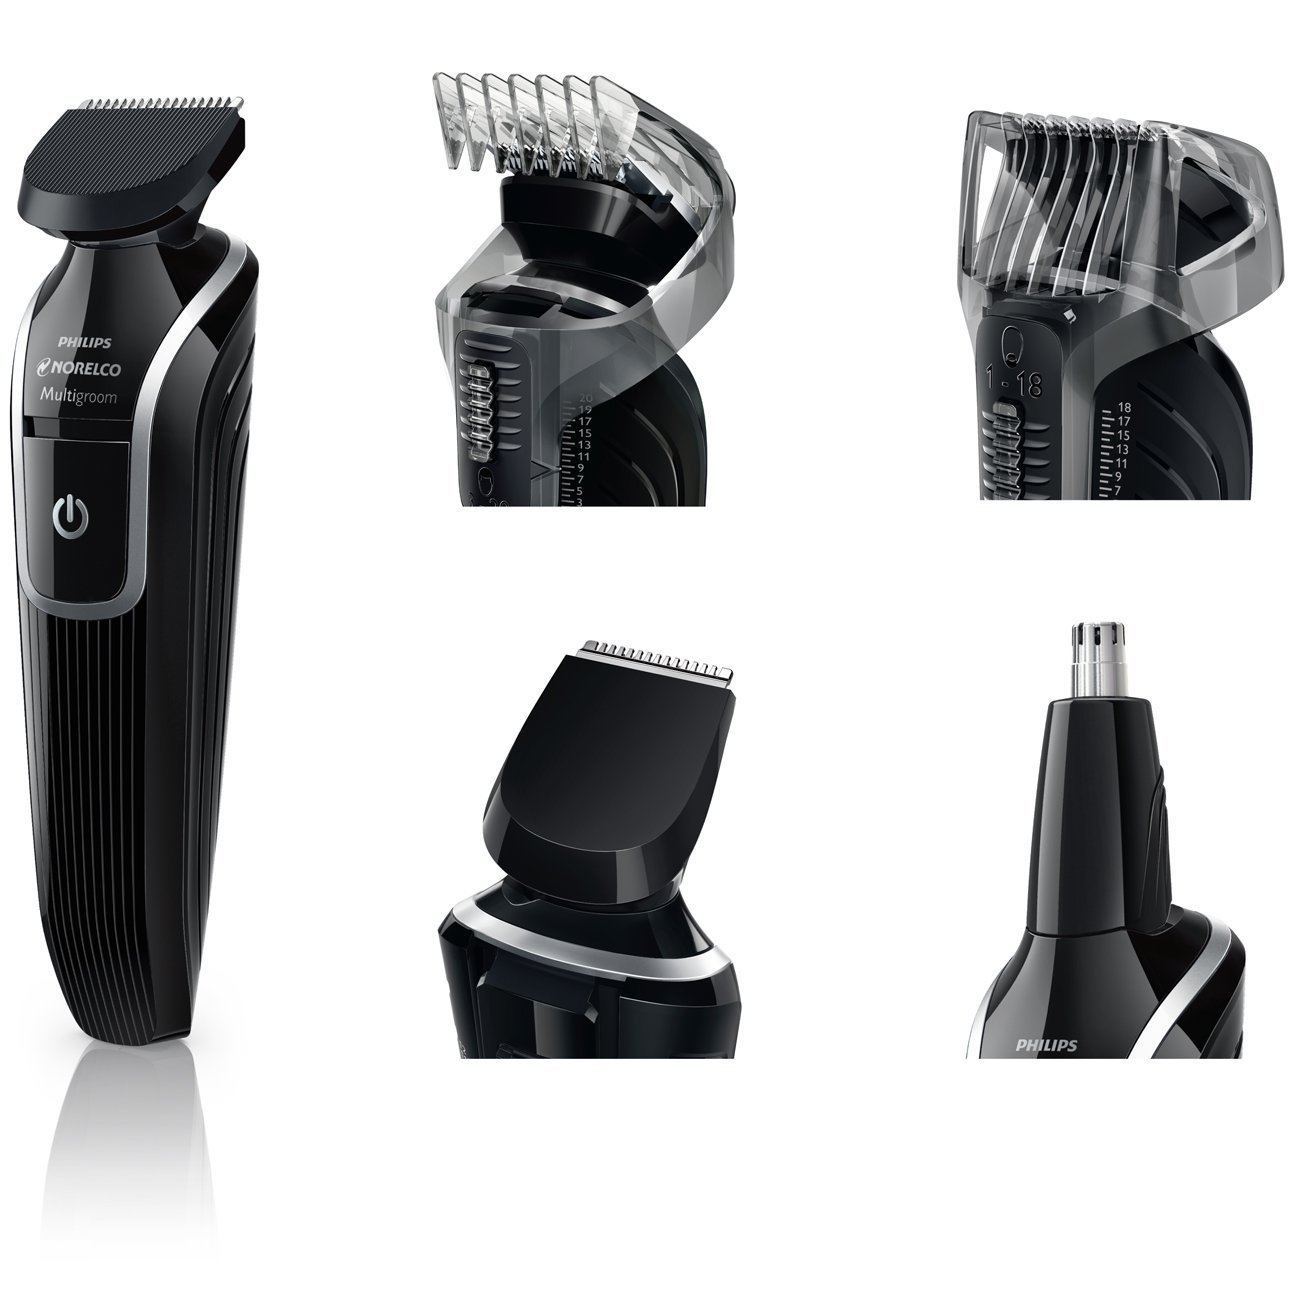 philips 3100 trimmer